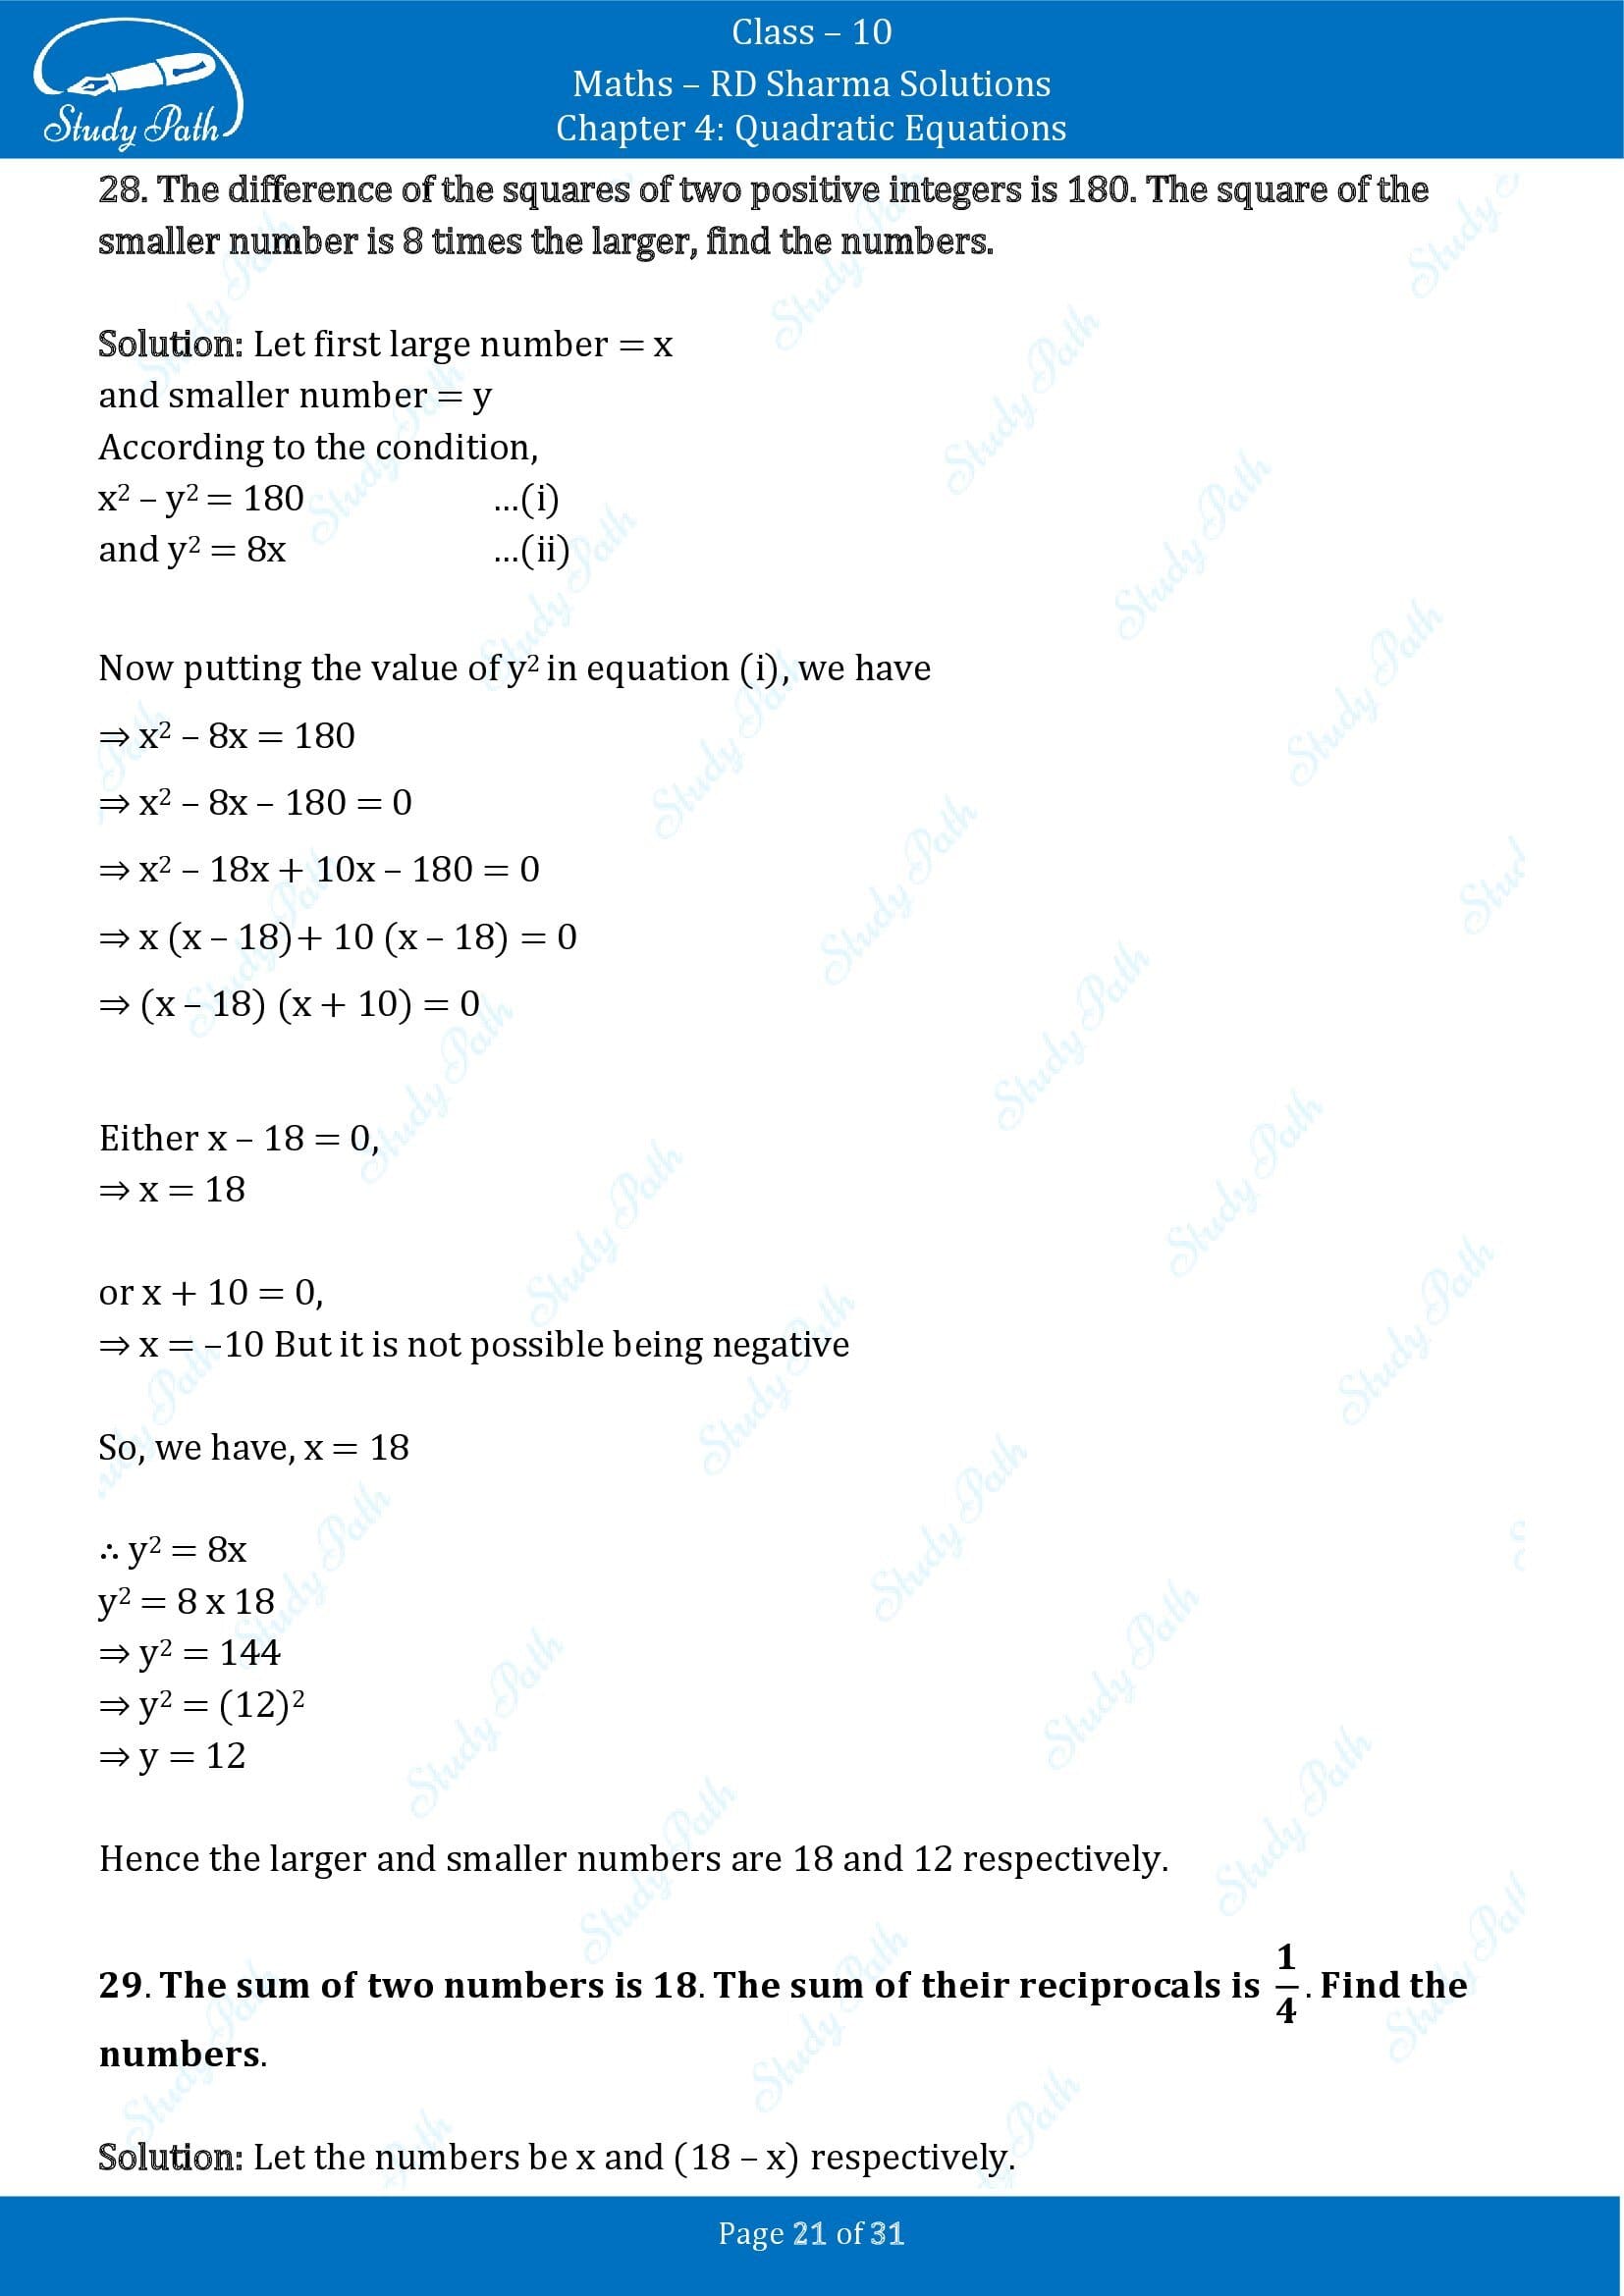 RD Sharma Solutions Class 10 Chapter 4 Quadratic Equations Exercise 4.7 00021